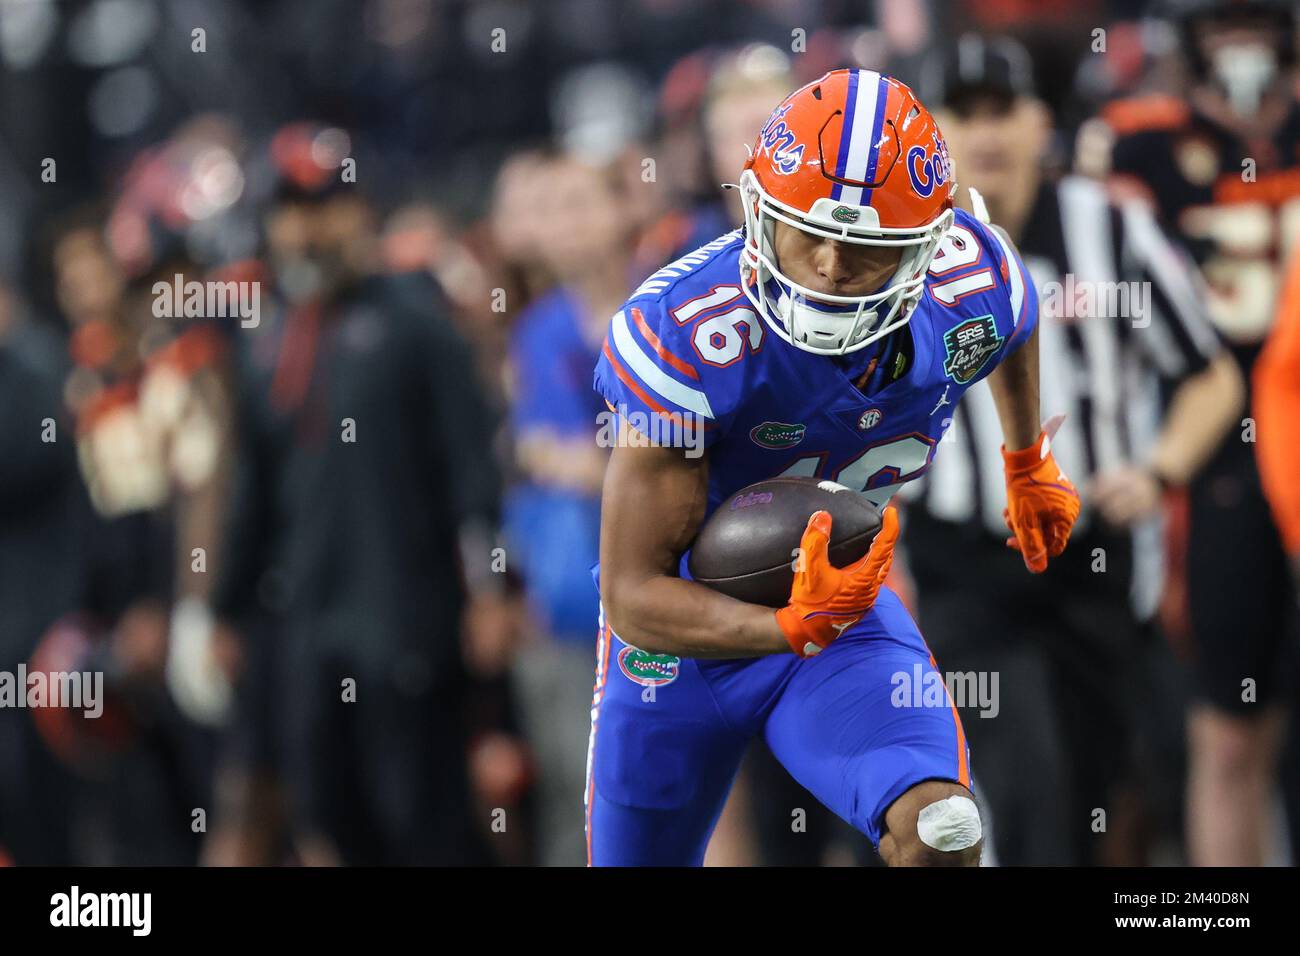 Las Vegas, NV, USA. 17th Dec, 2022. Florida Gators wide receiver Thai Chiaokhiao-Bowman (16) runs with the football during the second half of the SRS Distribution Las Vegas Bowl featuring the Florida Gators and the Oregon State Beavers at Allegiant Stadium in Las Vegas, NV. Christopher Trim/CSM/Alamy Live News Stock Photo